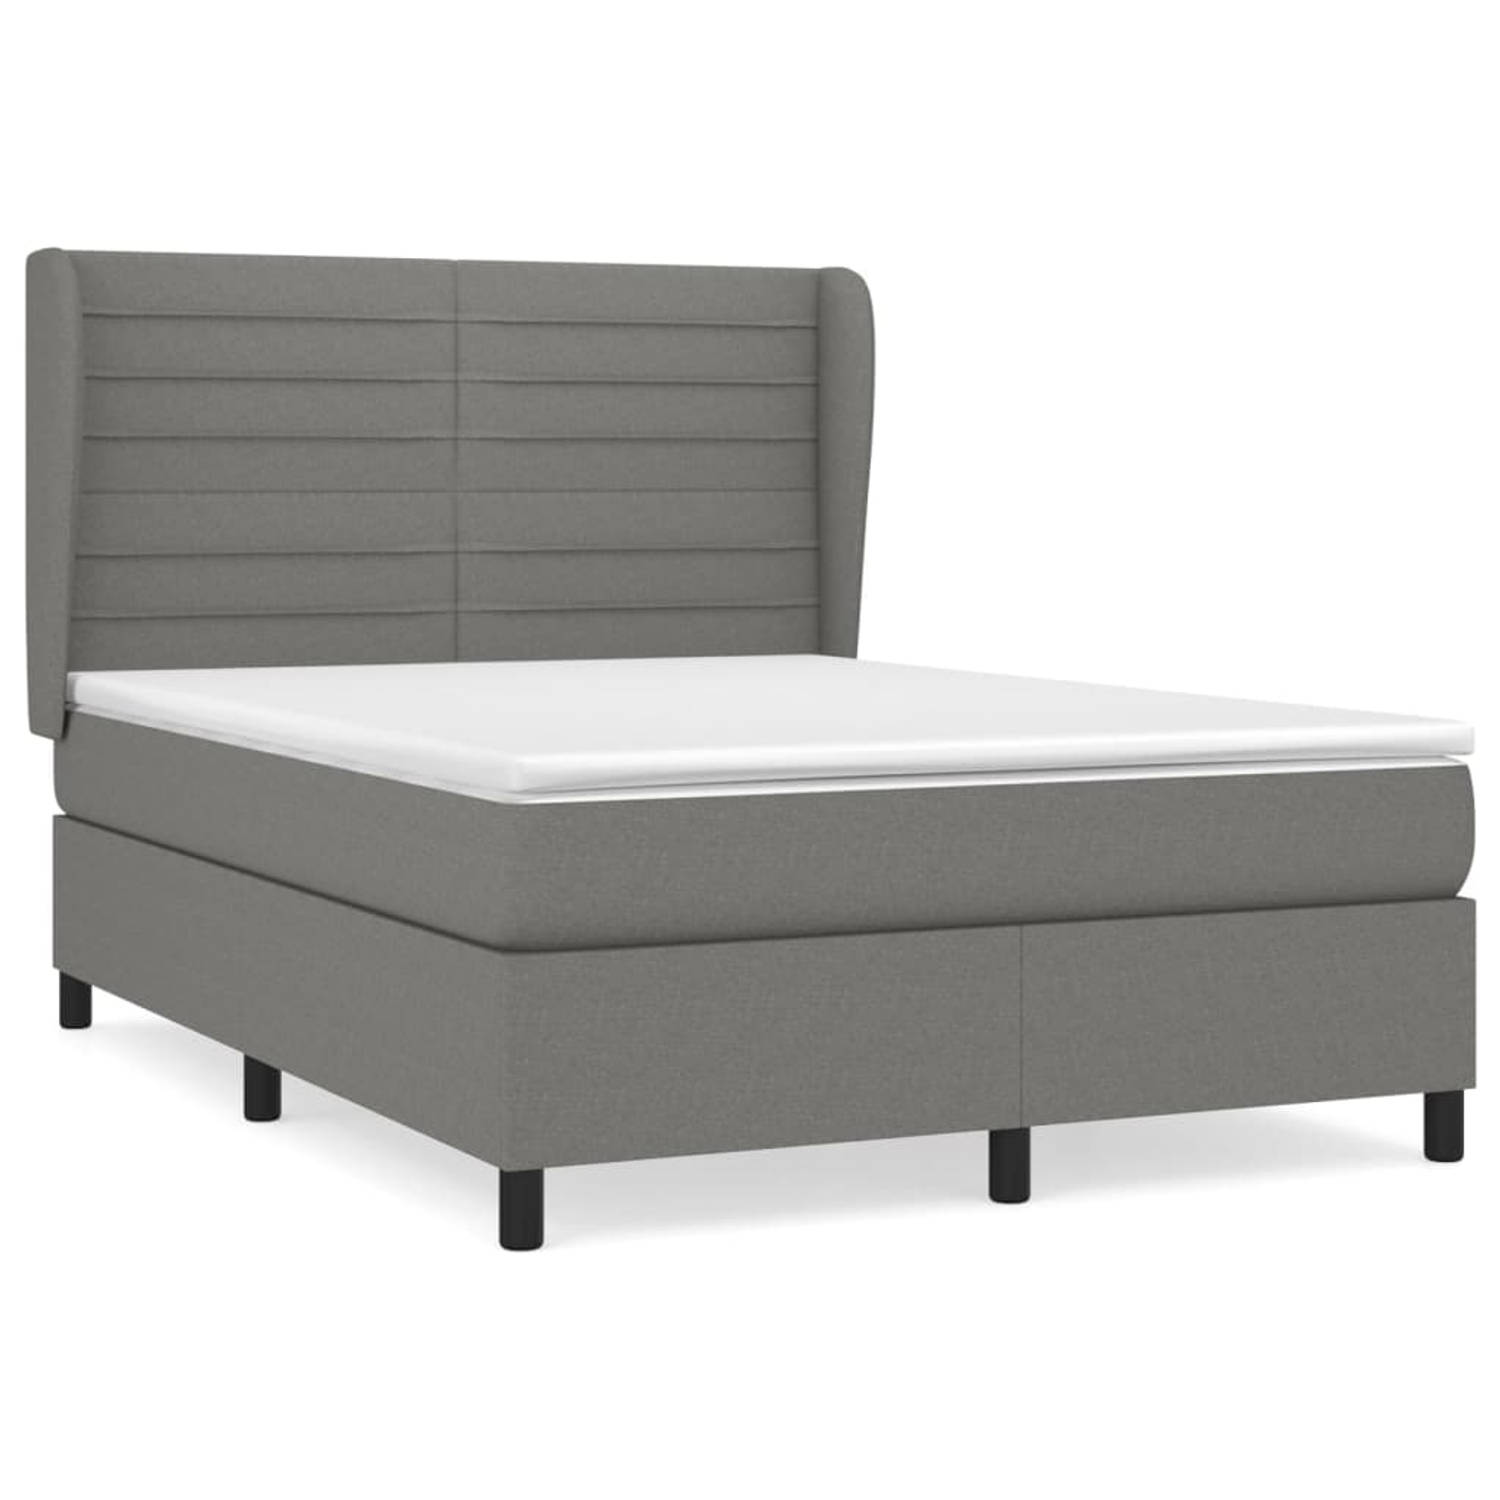 The Living Store Boxspringbed - donkergrijs - 193x147x118/128 cm - comfortabele ondersteuning - duurzaam materiaal